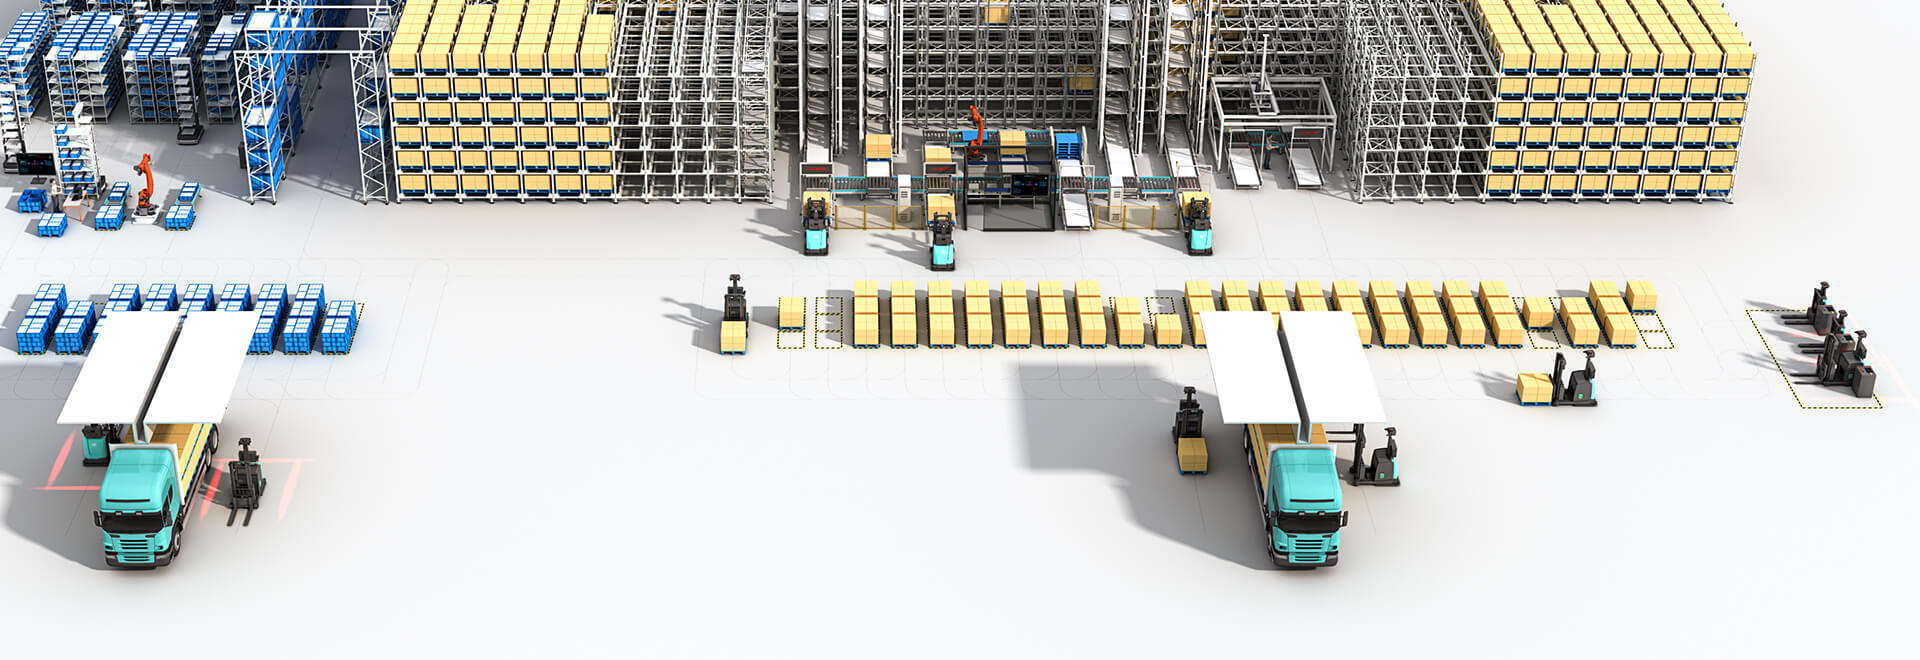 Smart Solutions for Third-Party Logistics: Multiway Robotics' Warehouse Automation Success